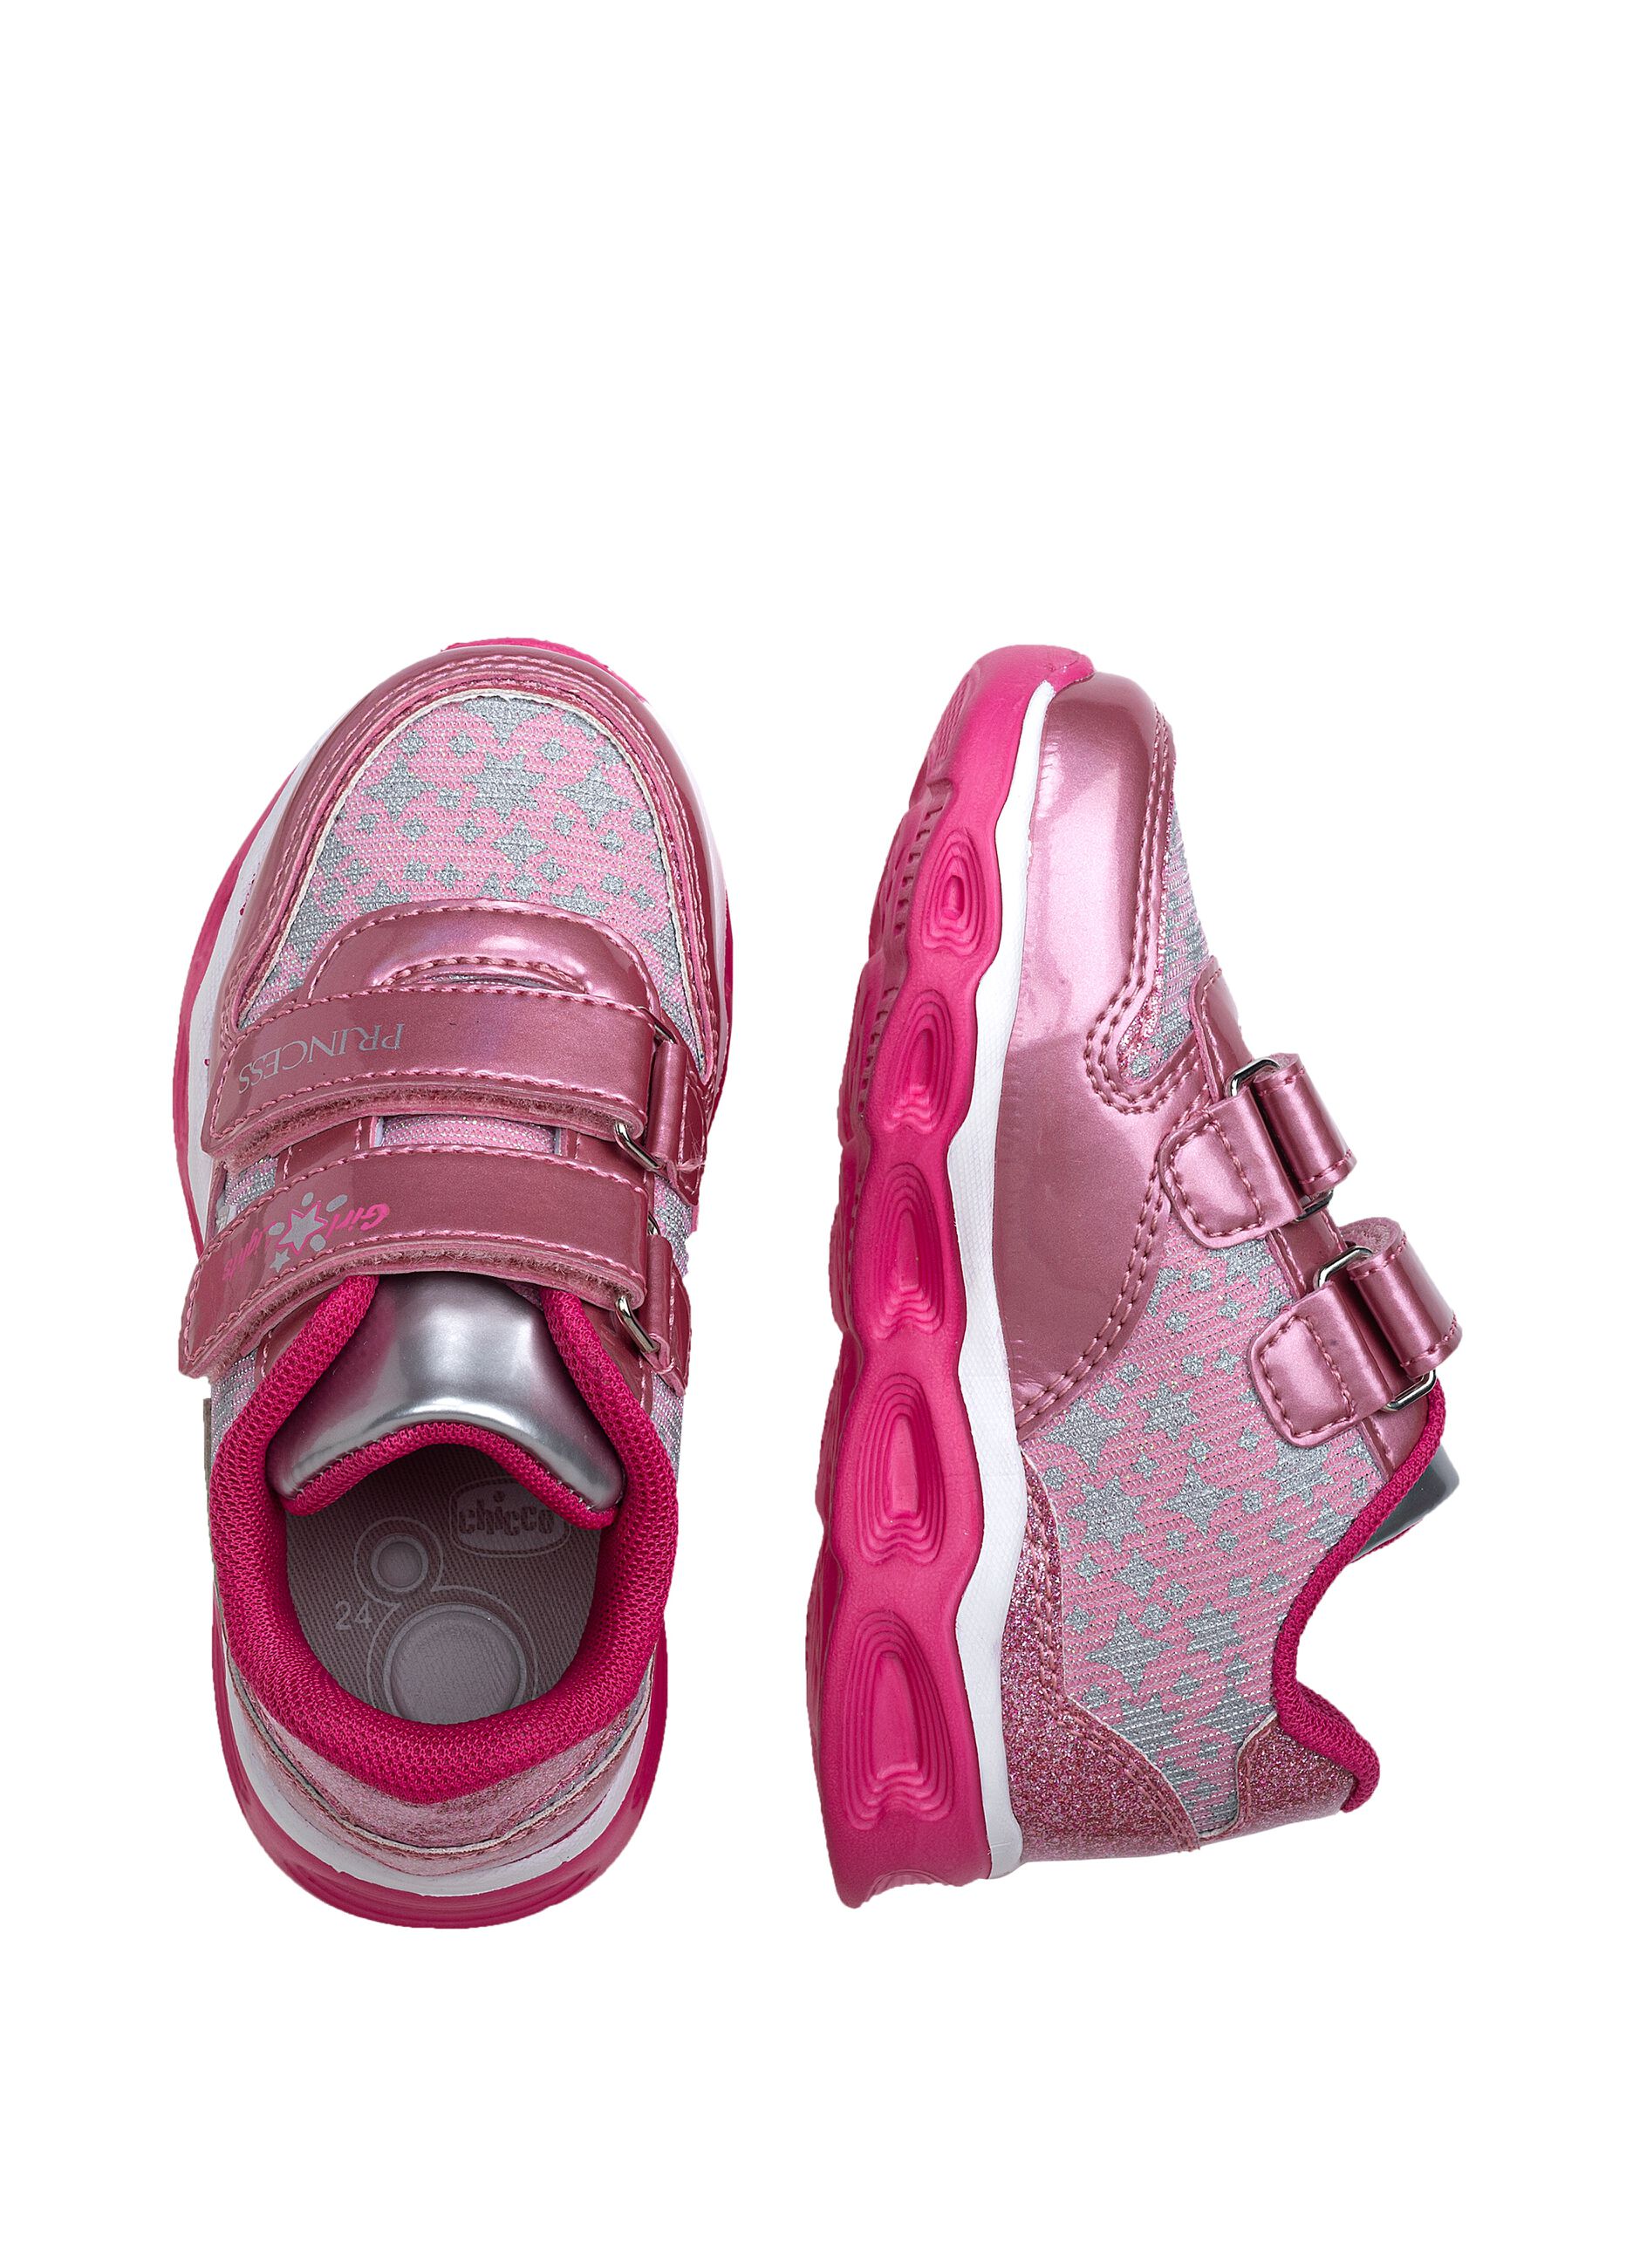 Chicco sneakers with lights